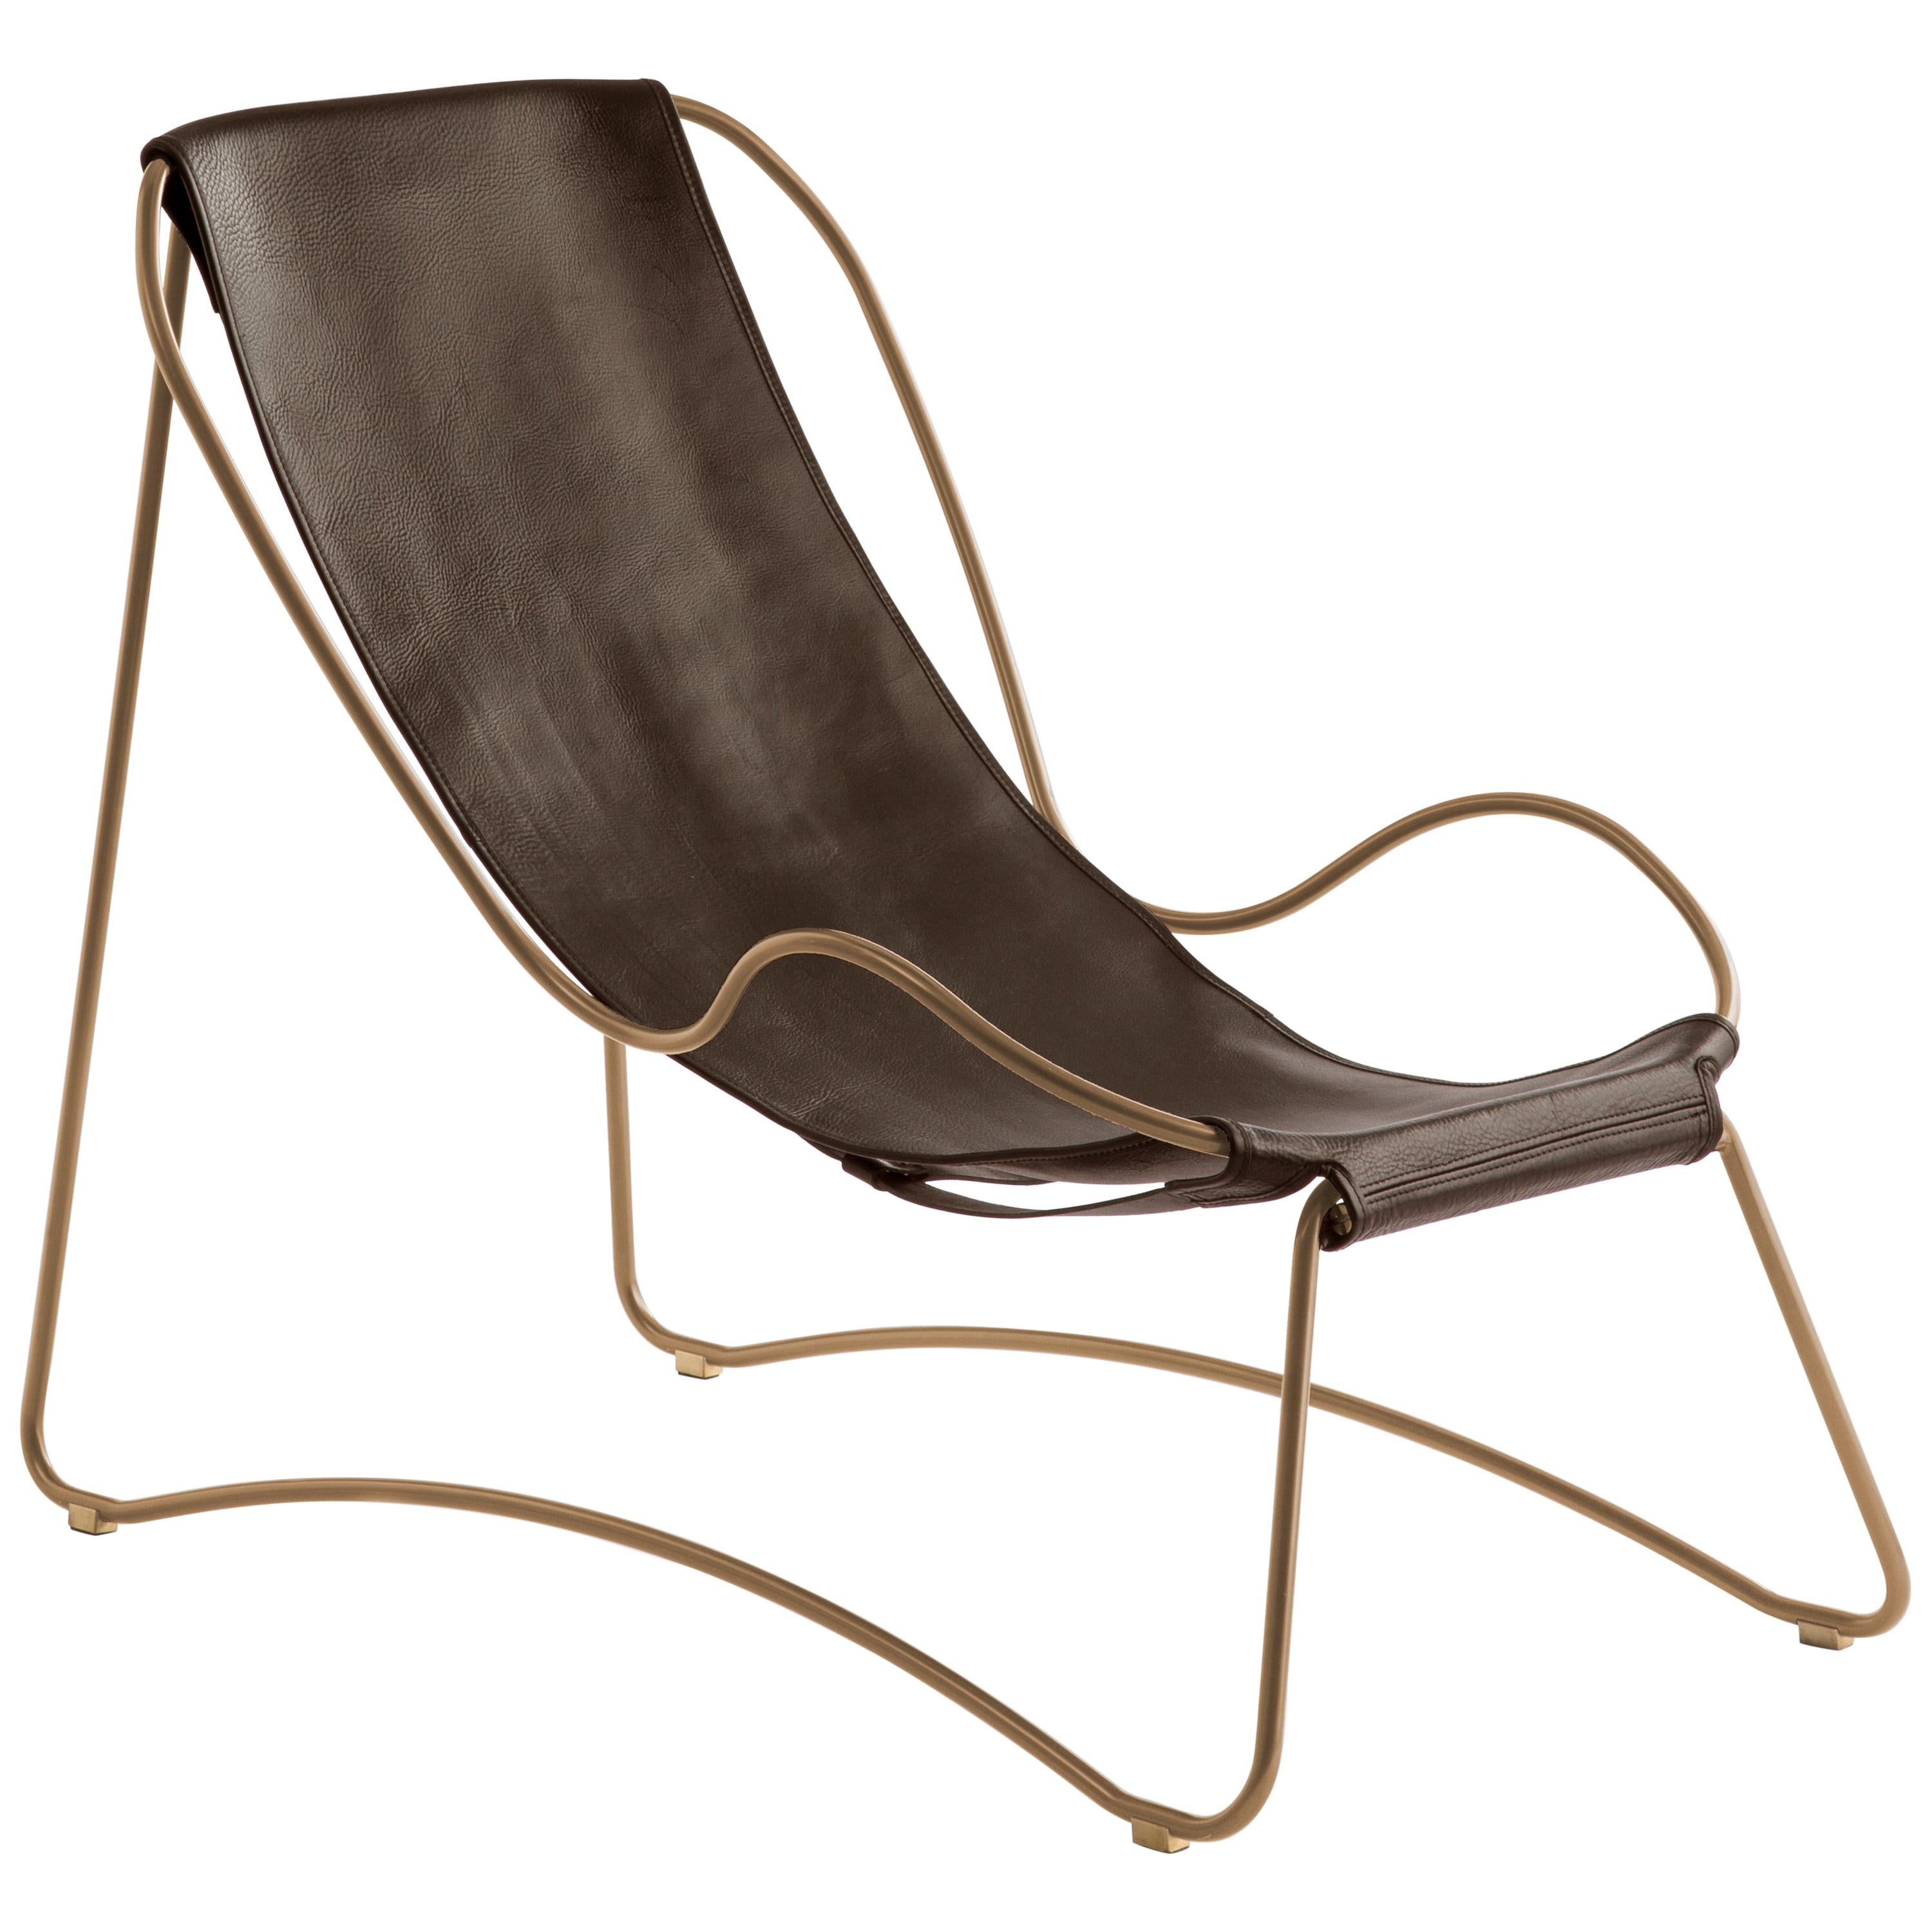 Sculptural Contemporary Chaise Lounge Aged Brass Steel & Dark Brown Leather